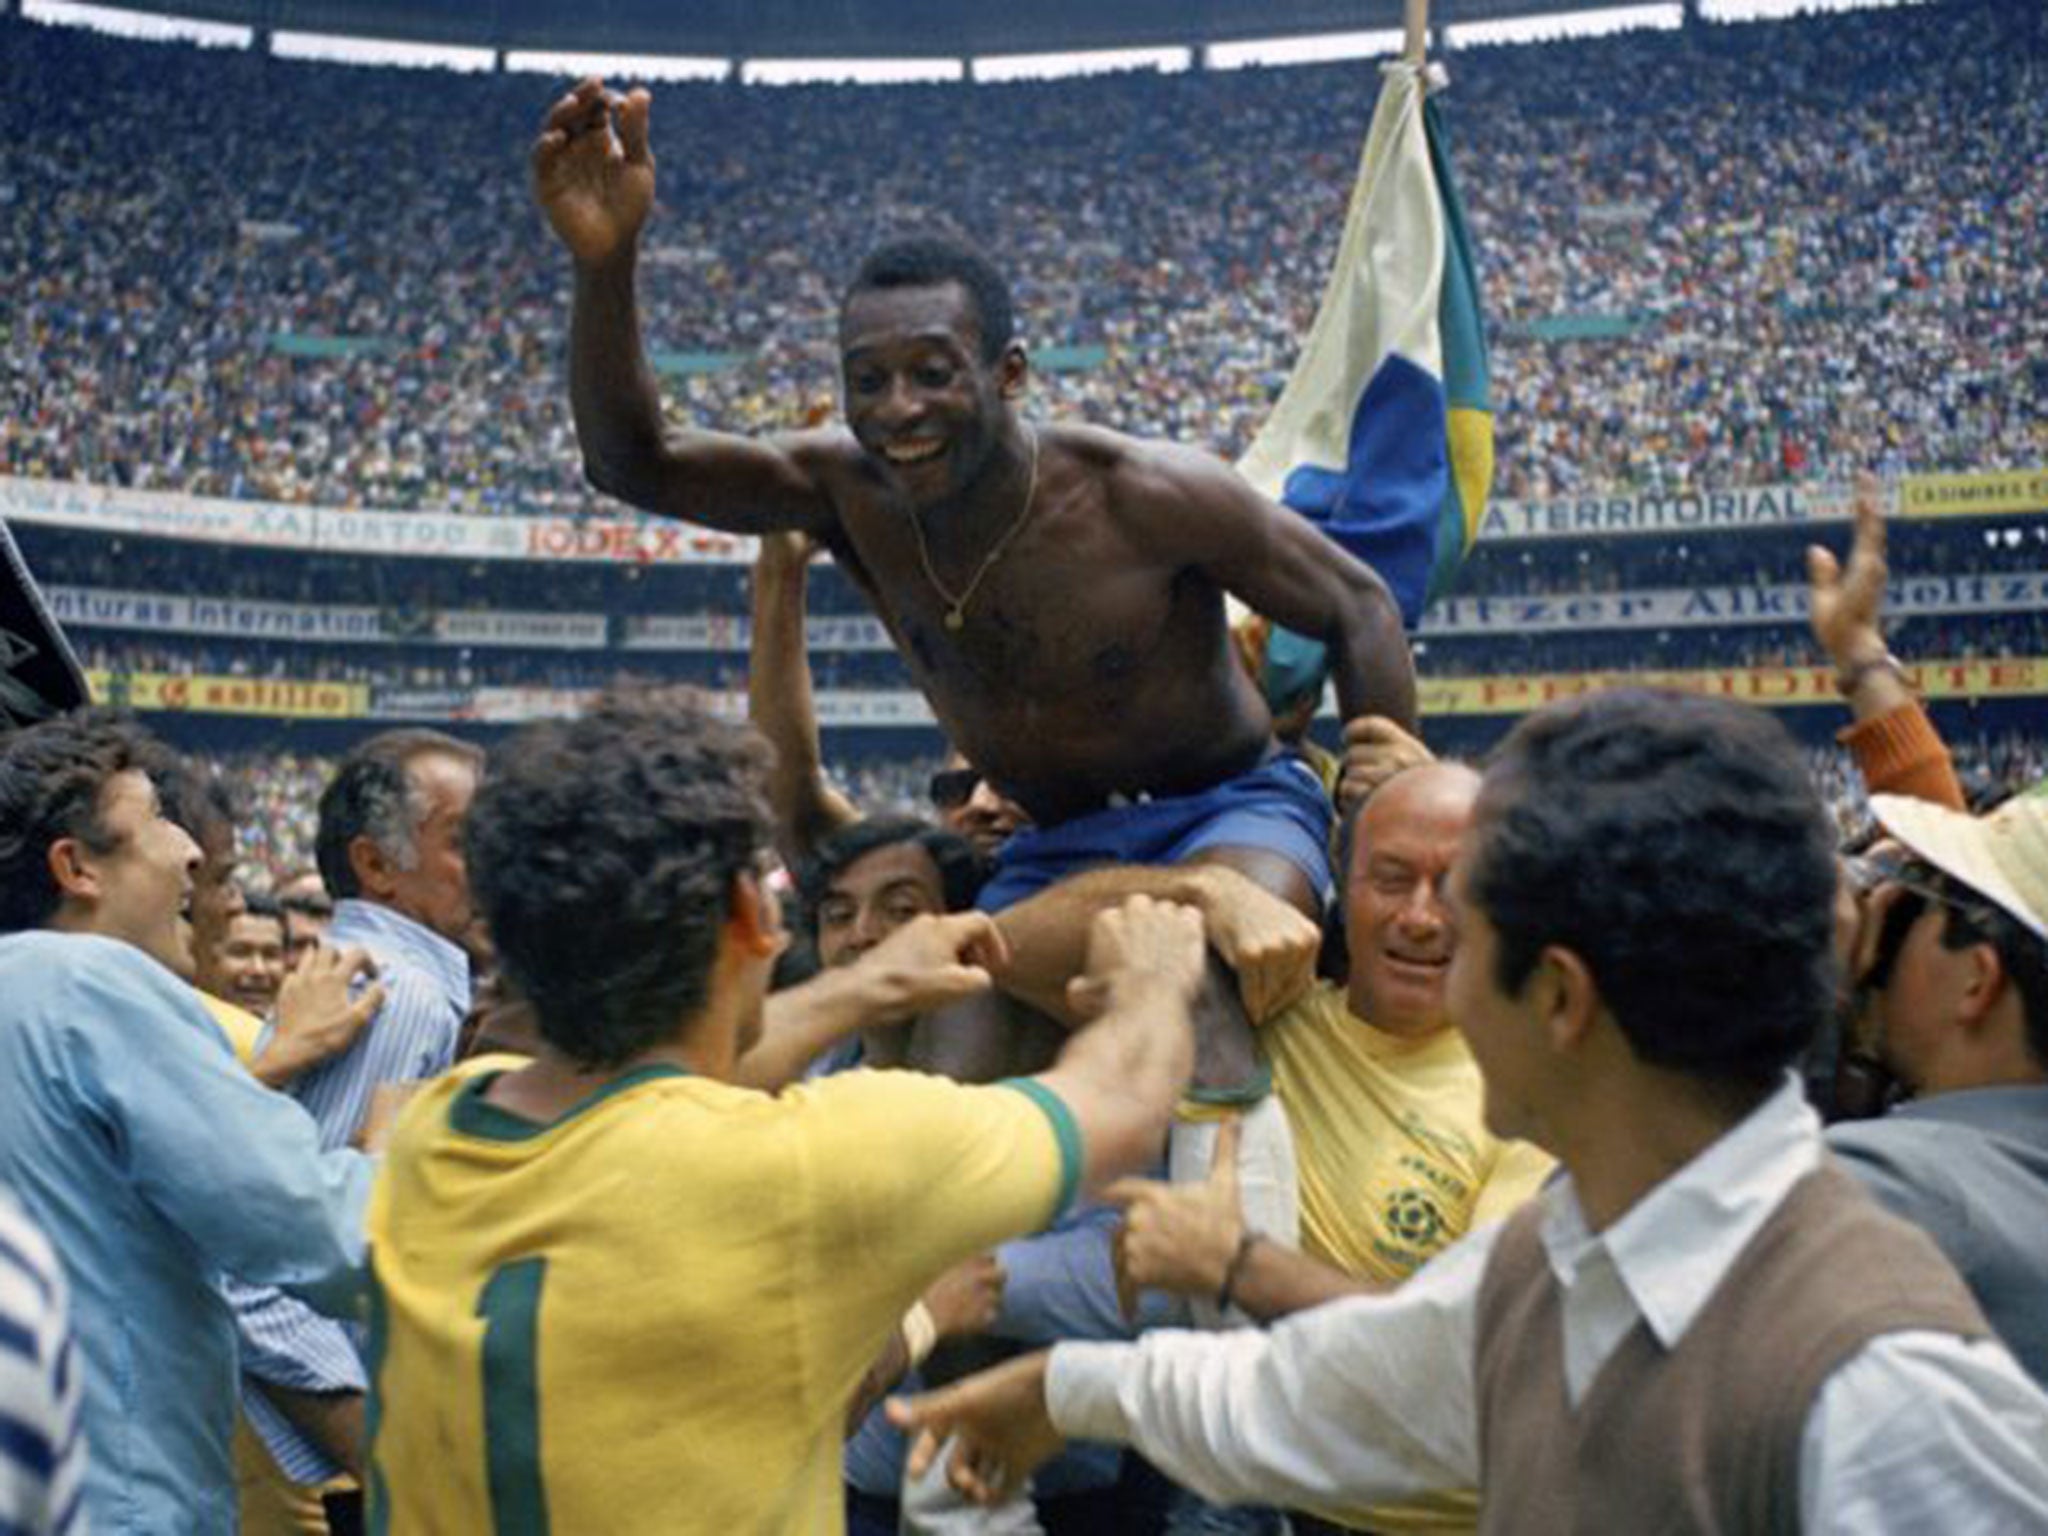 Despite his status as a footballer, Pele does not garner the same respect in Brazil as he does from the international community